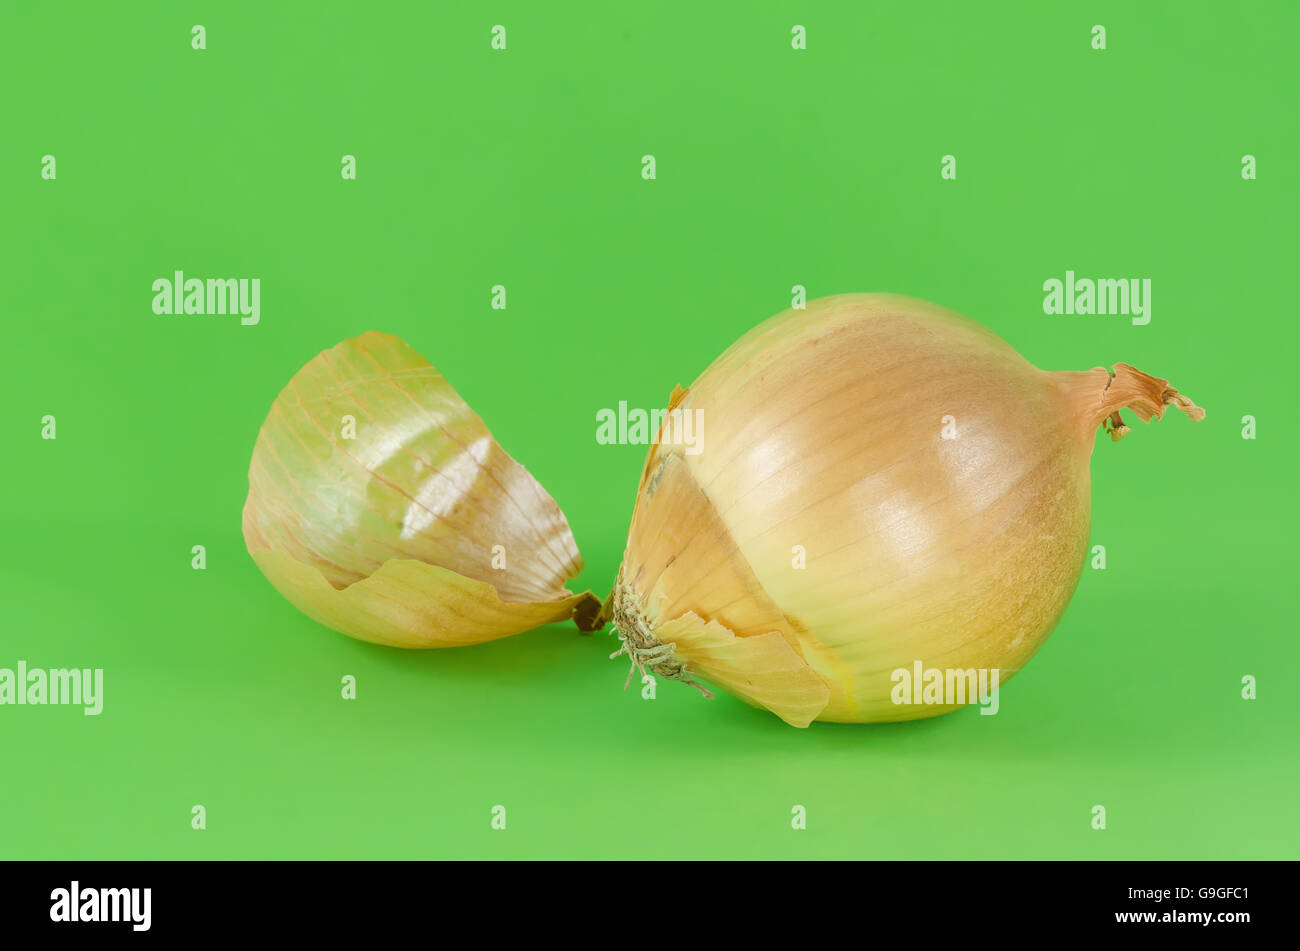 Ripe unpeeled onion on green background close up Stock Photo